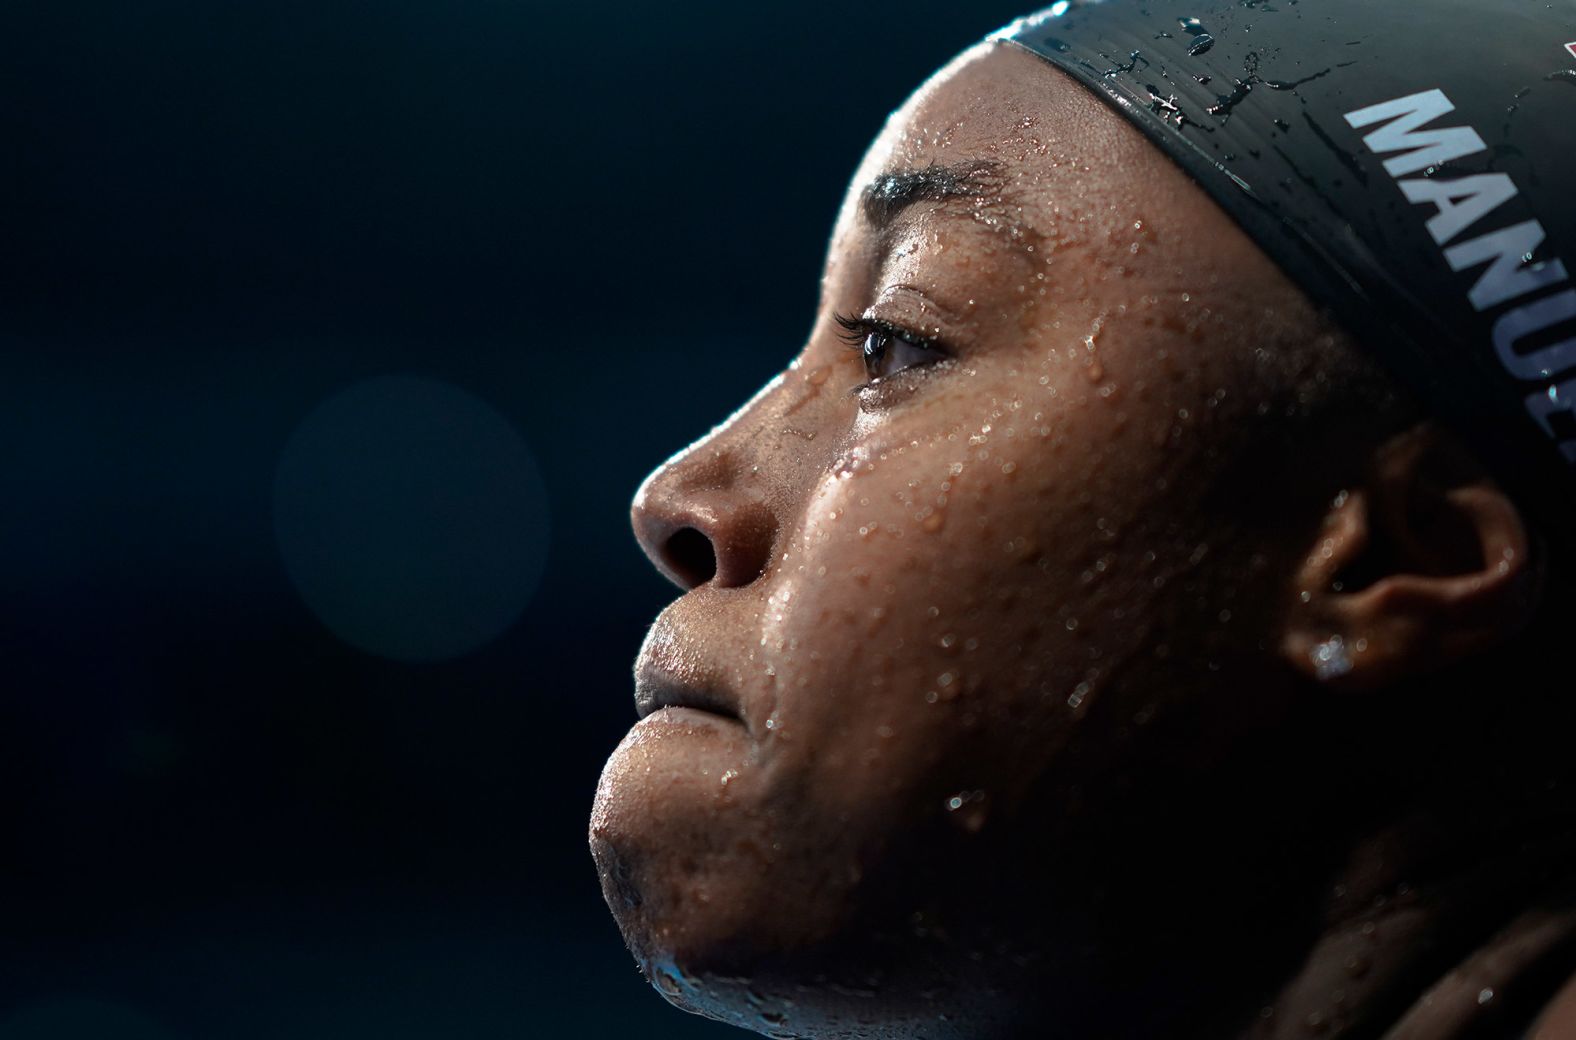 US swimmer Simone Manuel leaves the pool after <a href="index.php?page=&url=https%3A%2F%2Fwww.cnn.com%2Fworld%2Flive-news%2Ftokyo-2020-olympics-07-31-21-spt%2Fh_2c9984424e5cc46191c70c46ea5da190" target="_blank">failing to qualify for the 50-meter freestyle final</a> on July 31. In 2016, Manuel became the first African American woman to ever win an individual Olympic gold medal in swimming. 